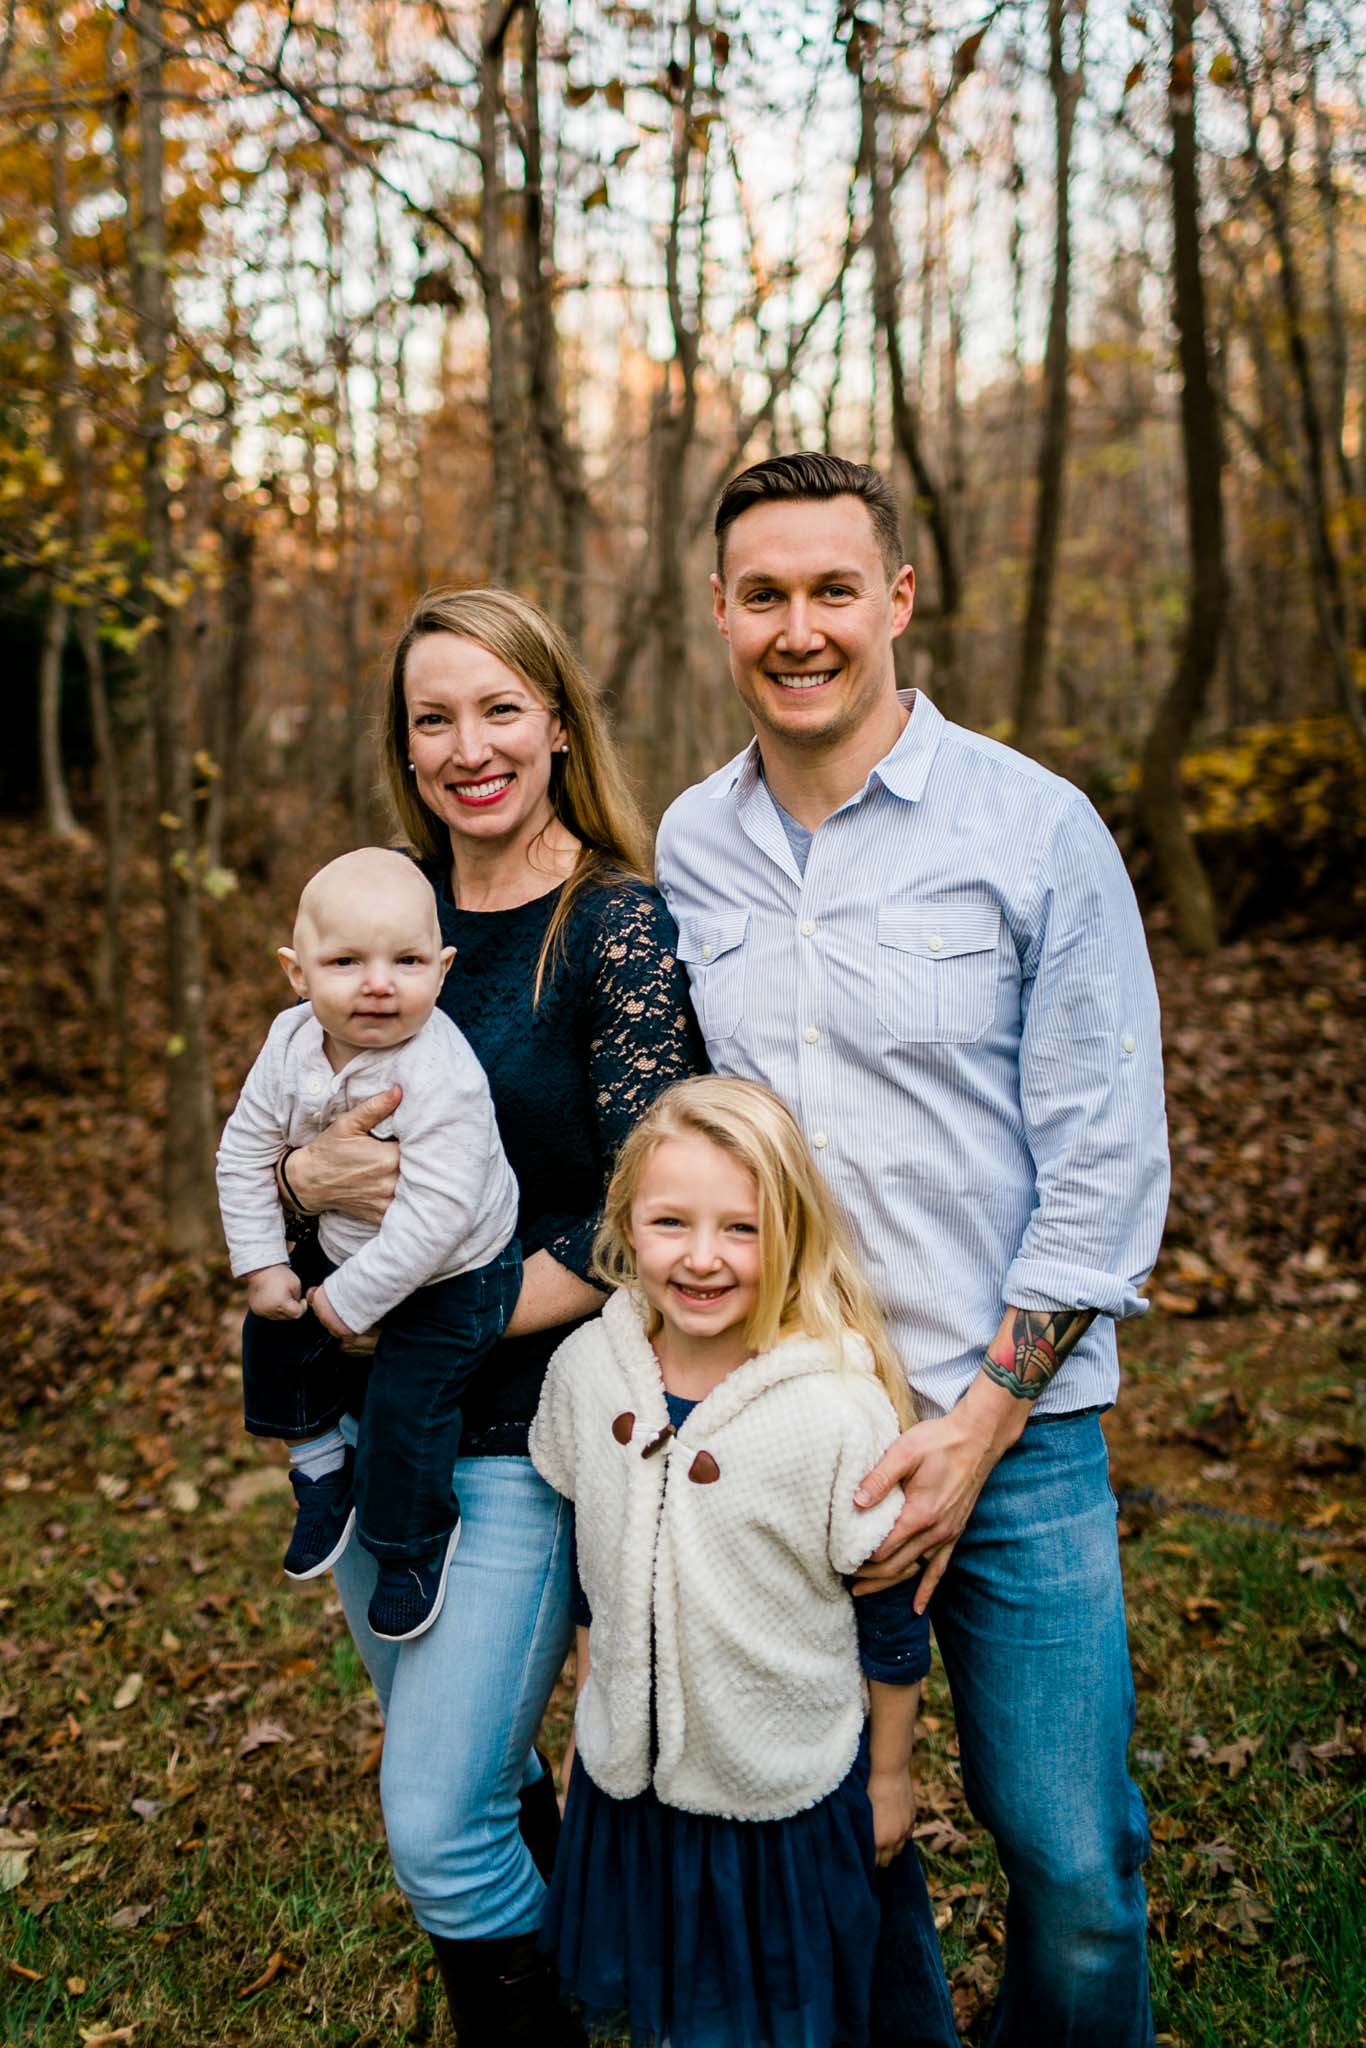 Outdoor fall family photo | By G. Lin Photography | Durham Photographer